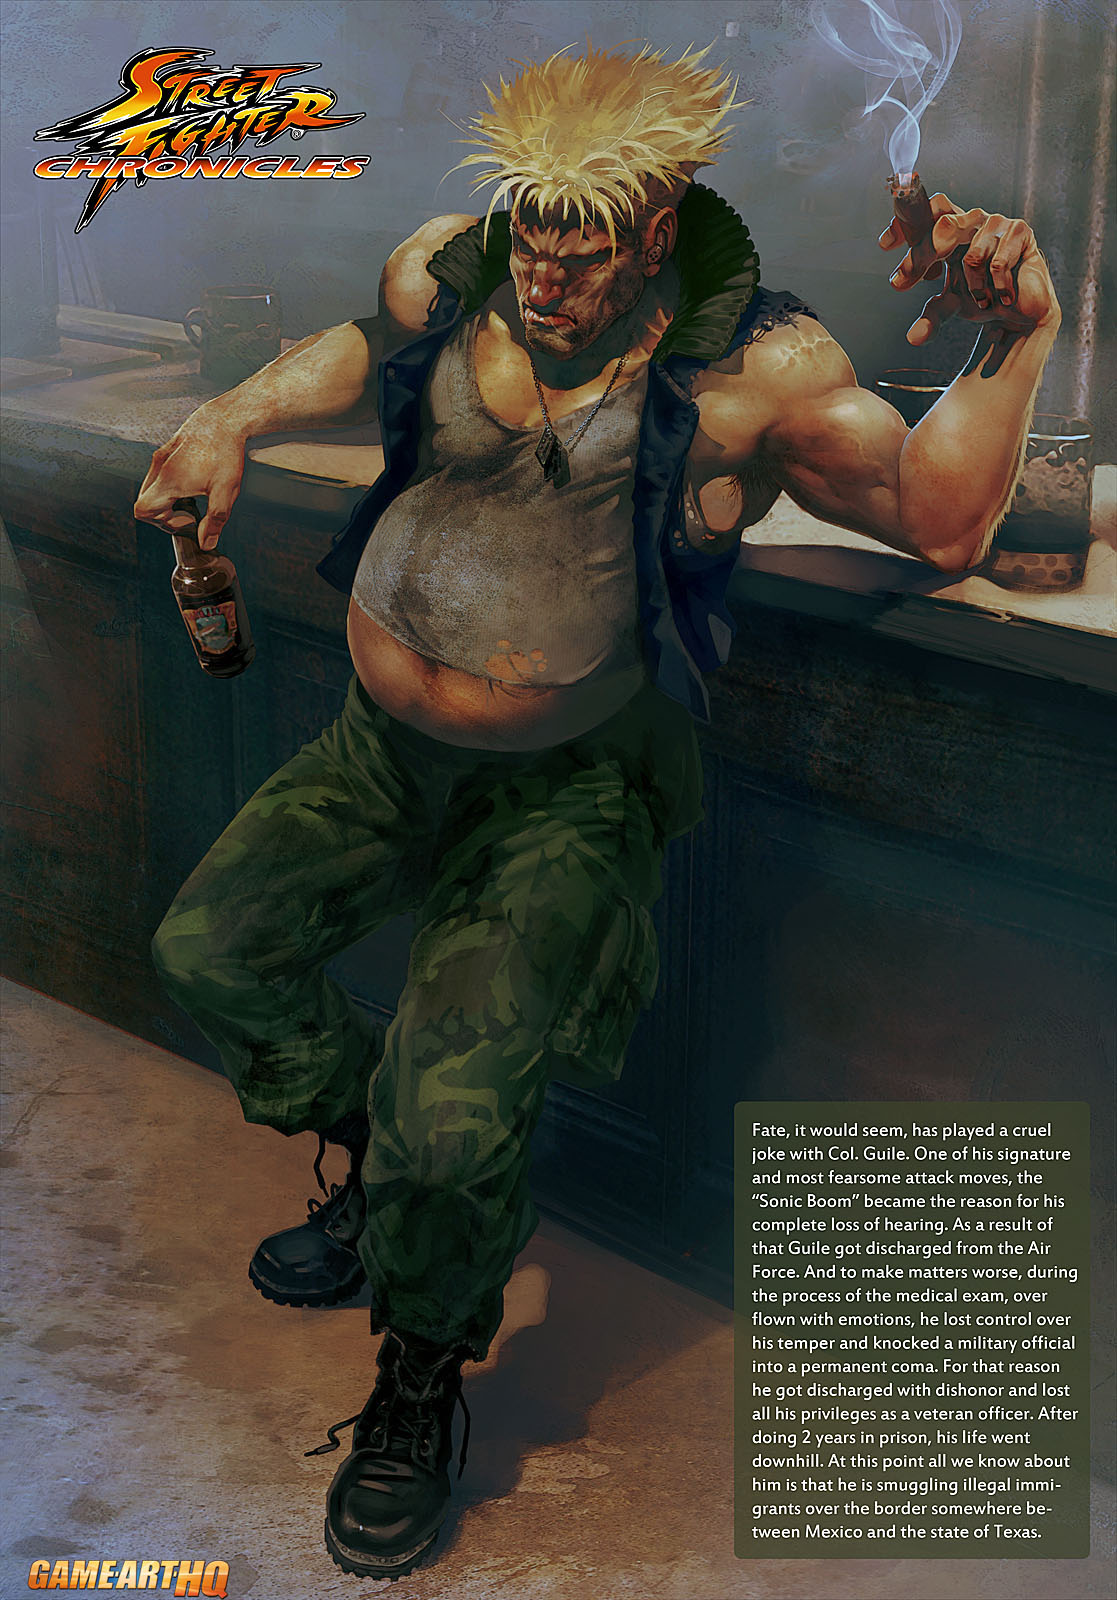 Guile (Street Fighter) by Greco14 on DeviantArt